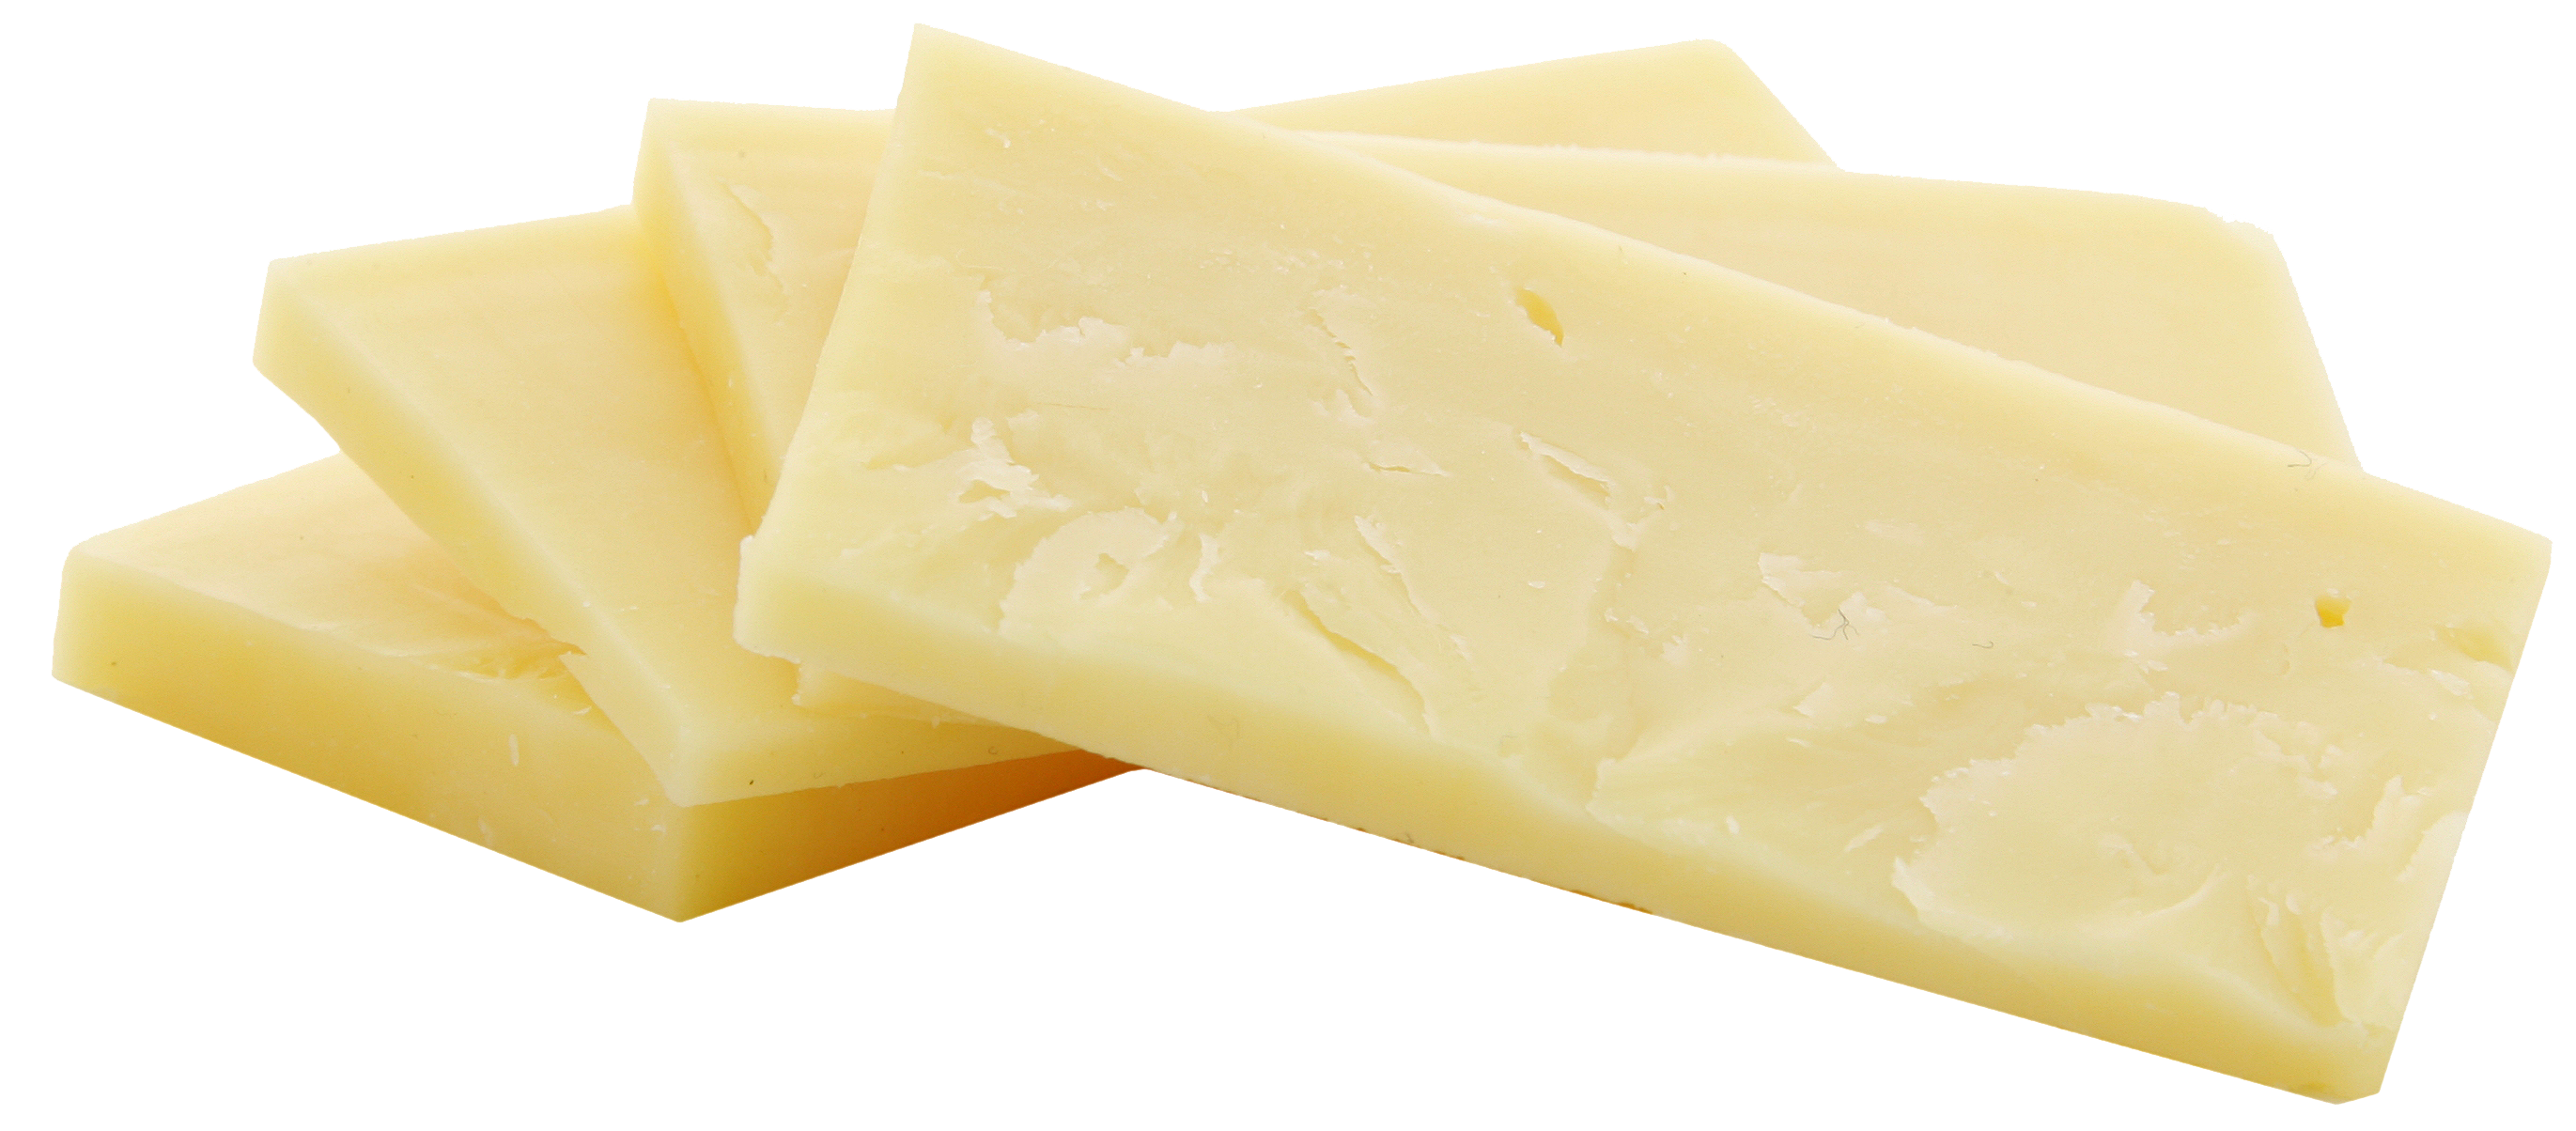 Cheese Png File - Cheese, Transparent background PNG HD thumbnail